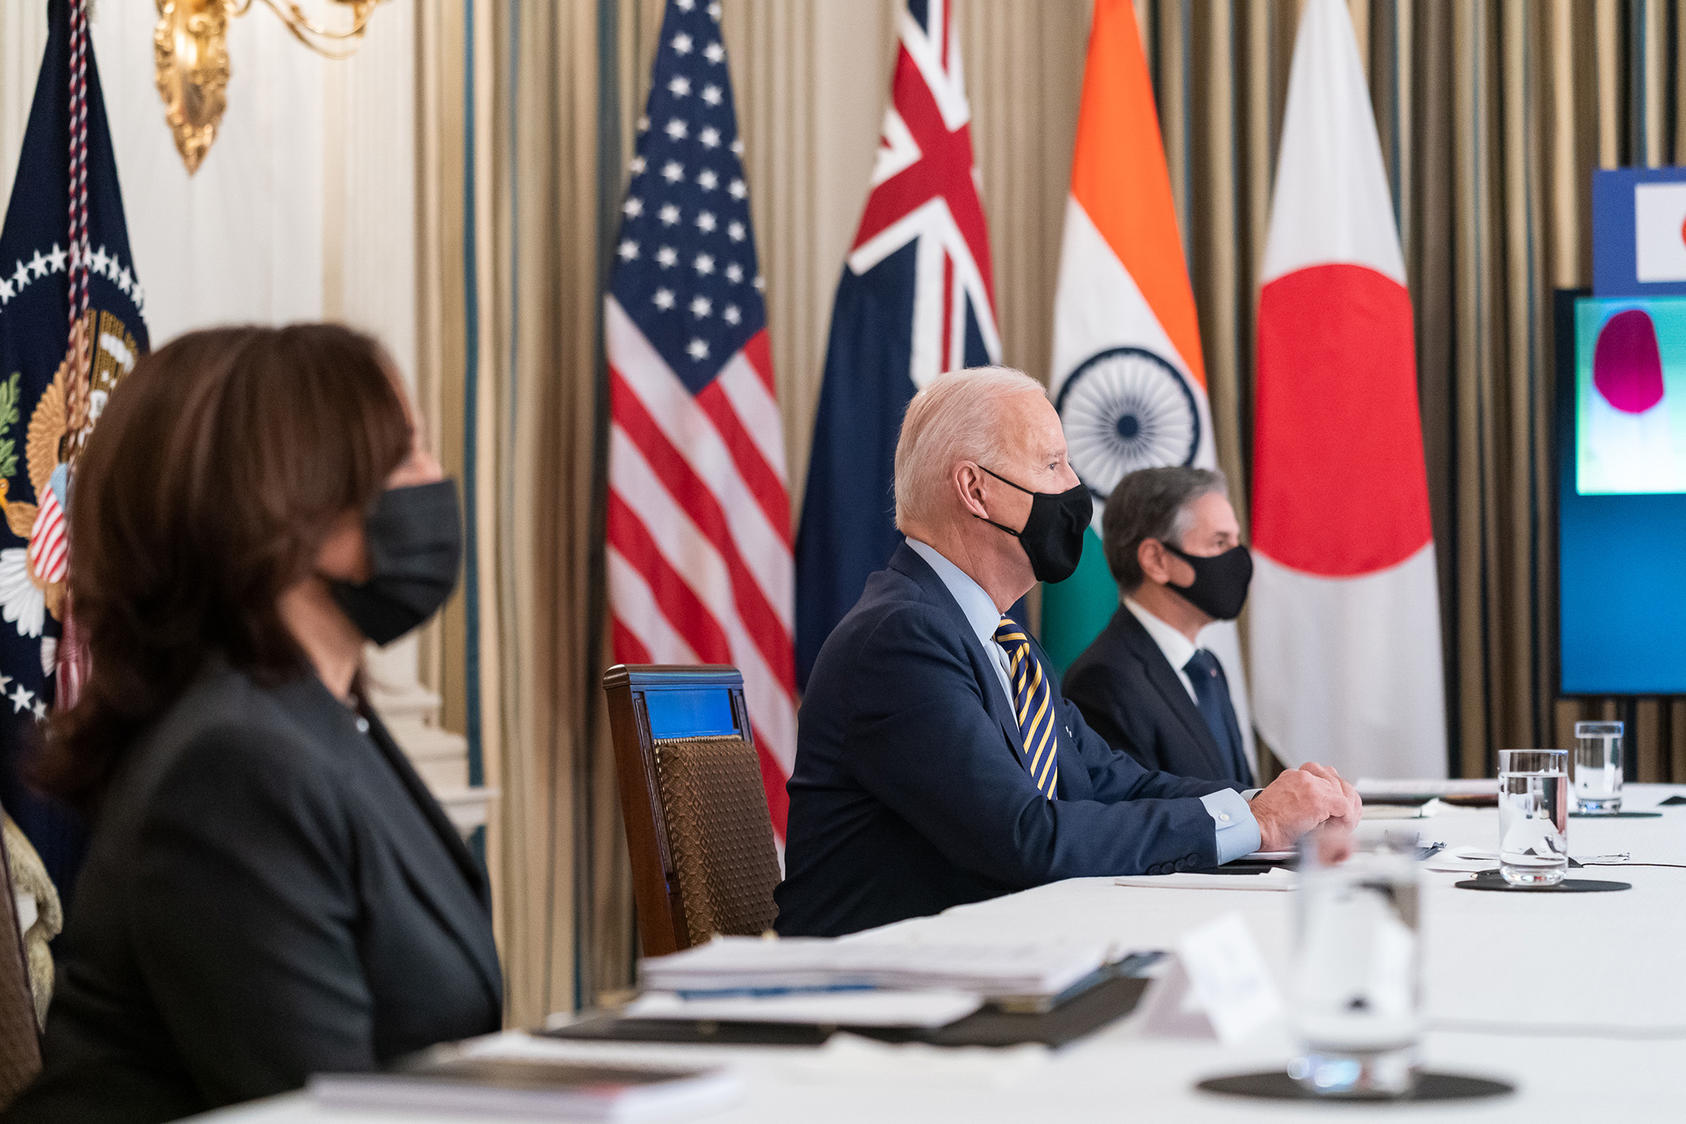 President Joe Biden, joined by Vice President Kamala Harris, Secretary of State Antony Blinken and White House staff, participates in the virtual Quad Summit with Australia, India and Japan Friday, March 12, 2021. (Adam Schultz/Official White House Photo)